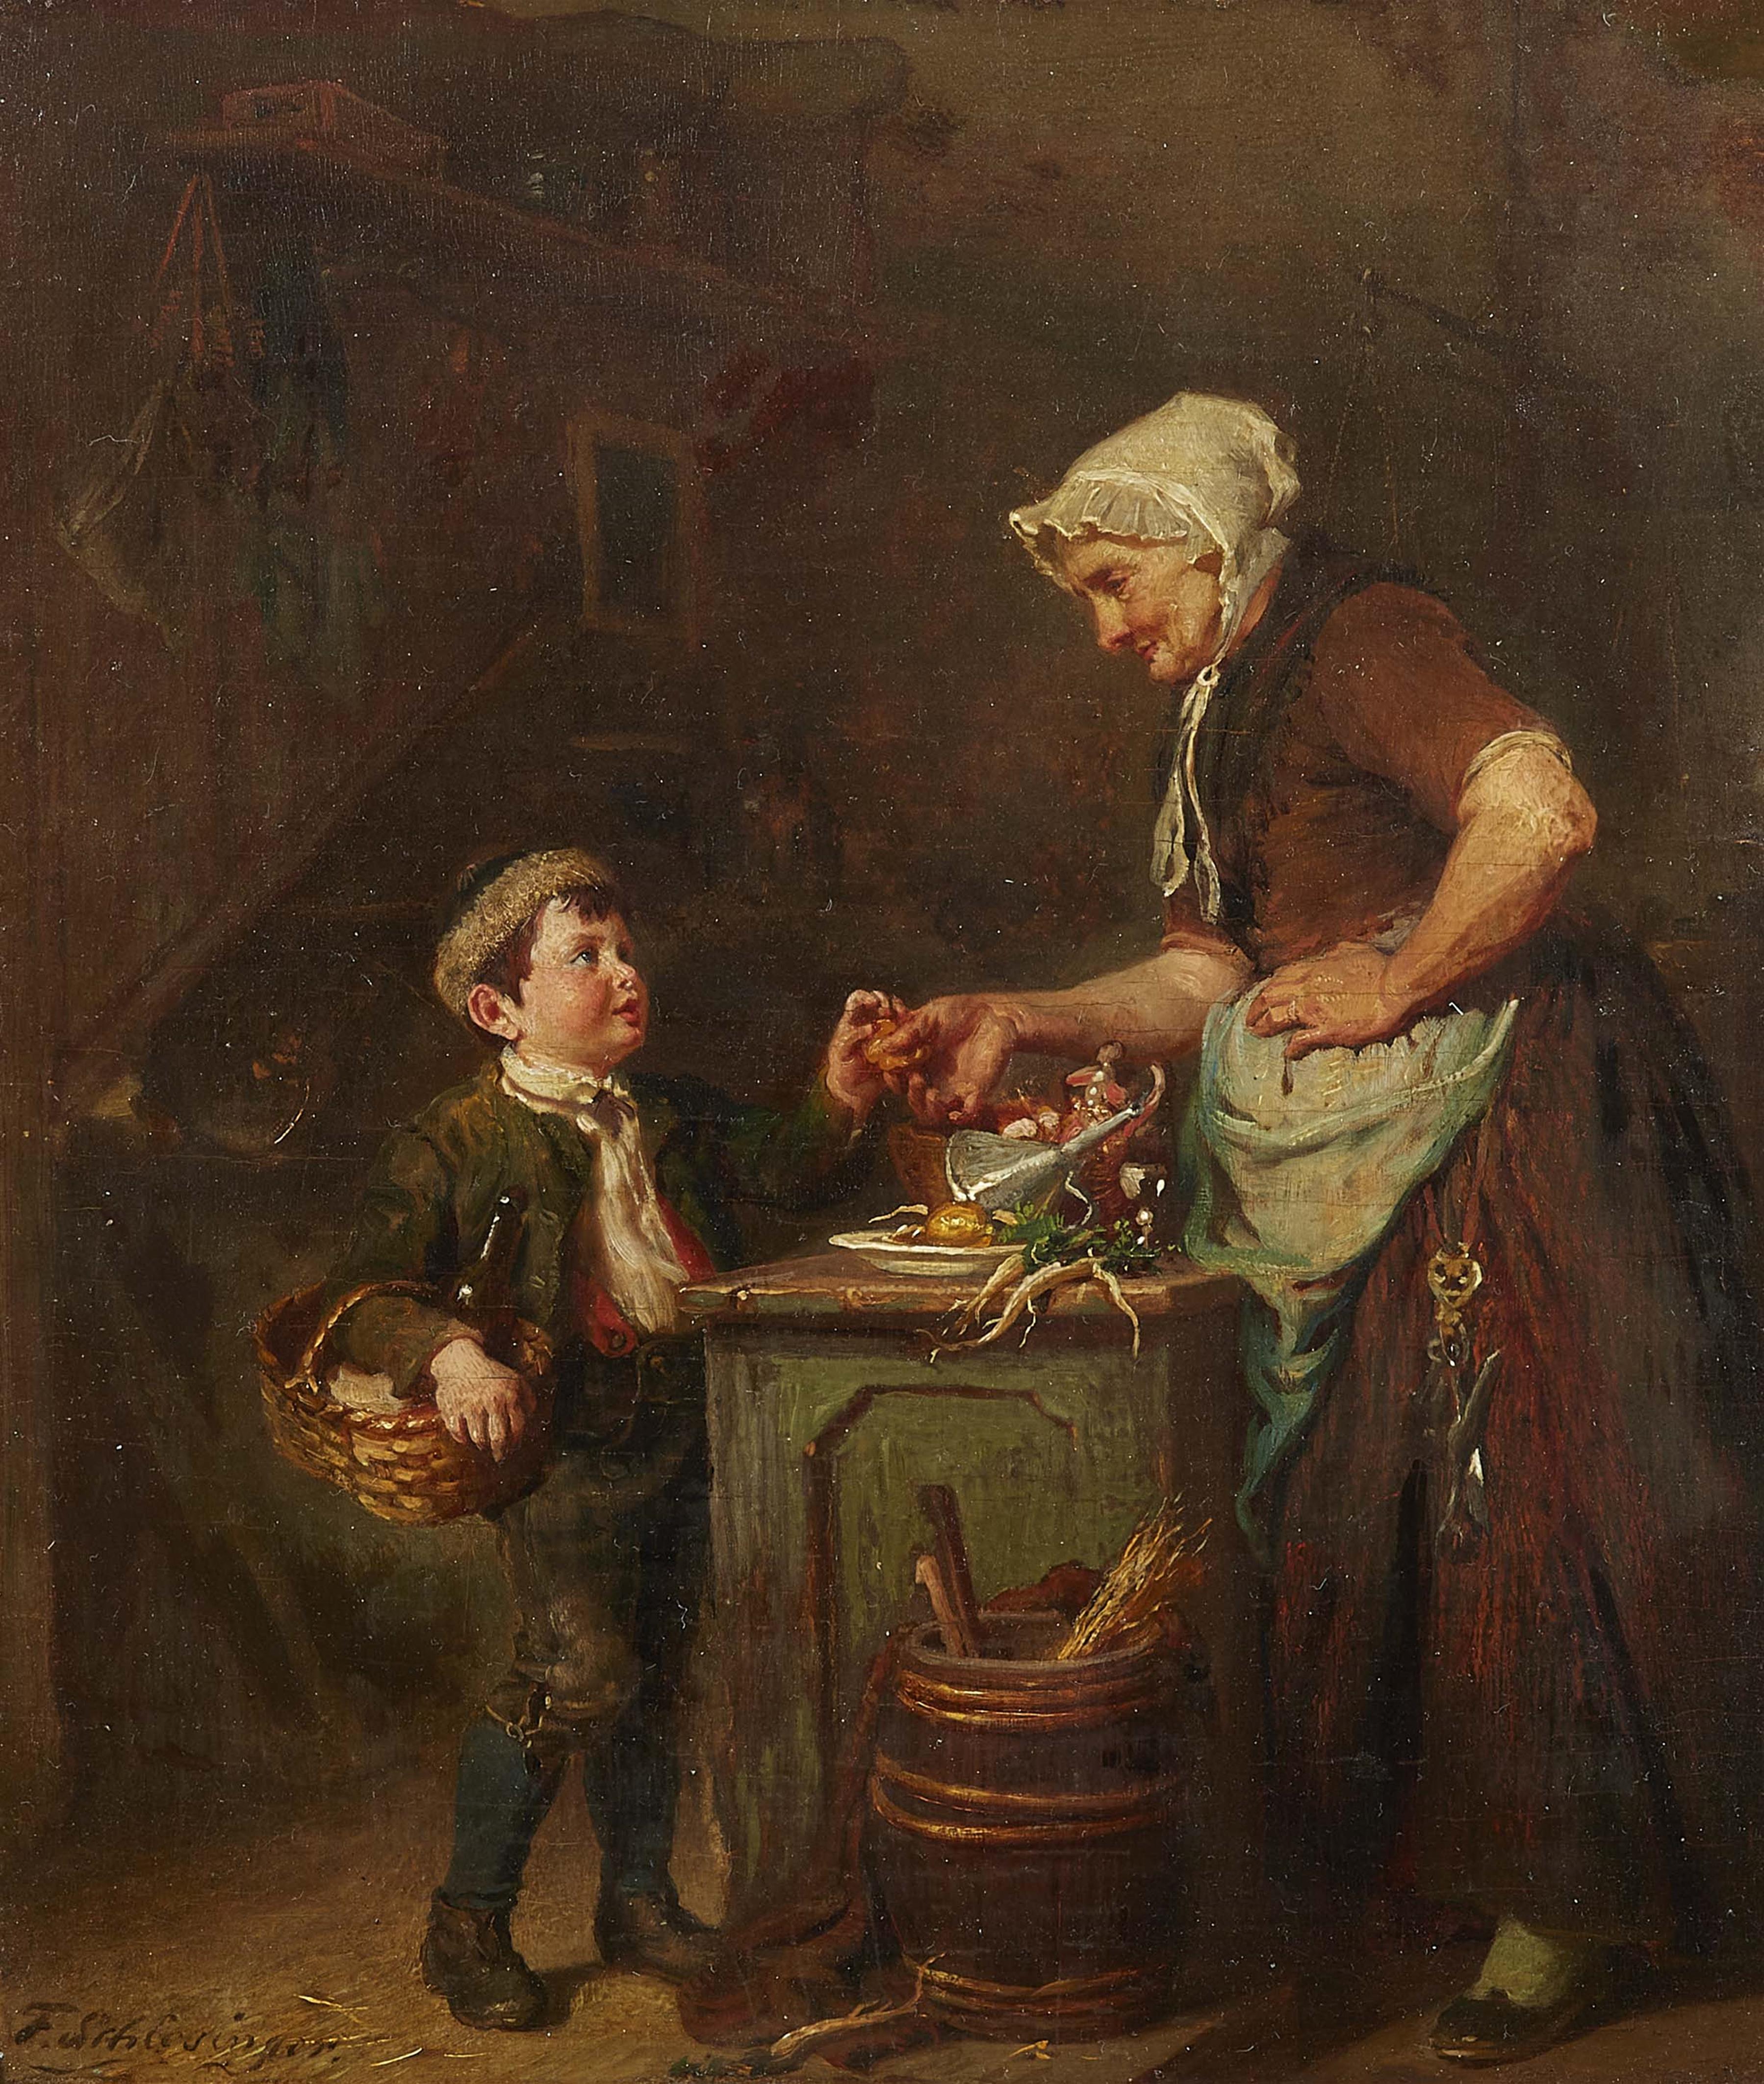 Felix Schlesinger - Interior Scene with a Merchant and a Young Customer - image-1